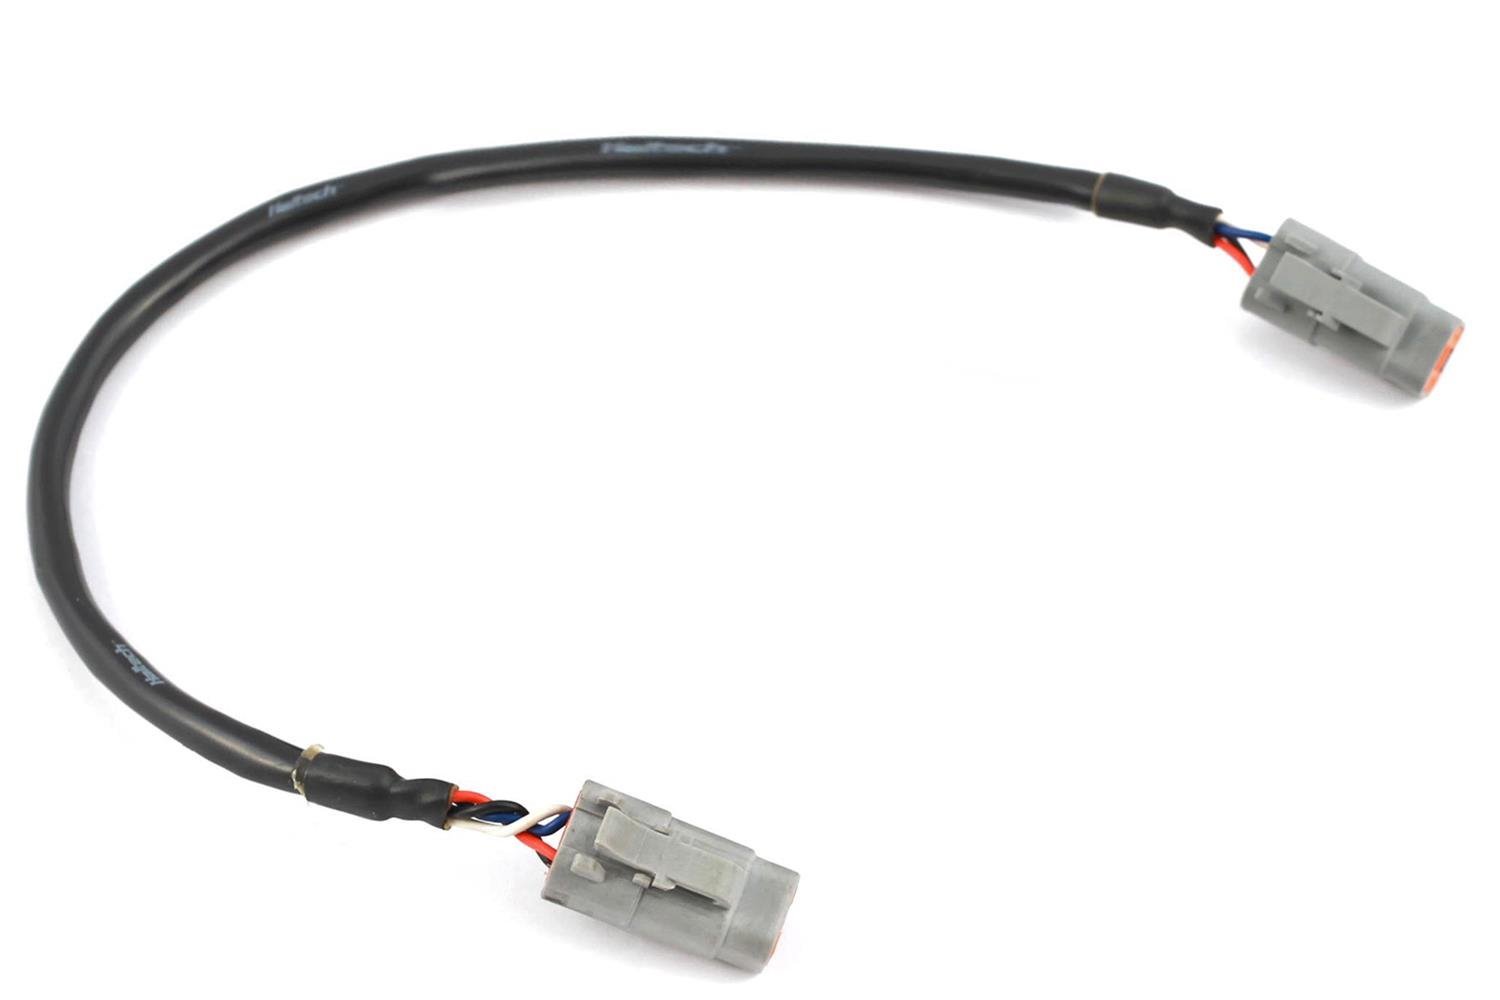 HT-130022 Elite CAN Cable, DTM-4 to DTM-4, 300 mm (12 in.)